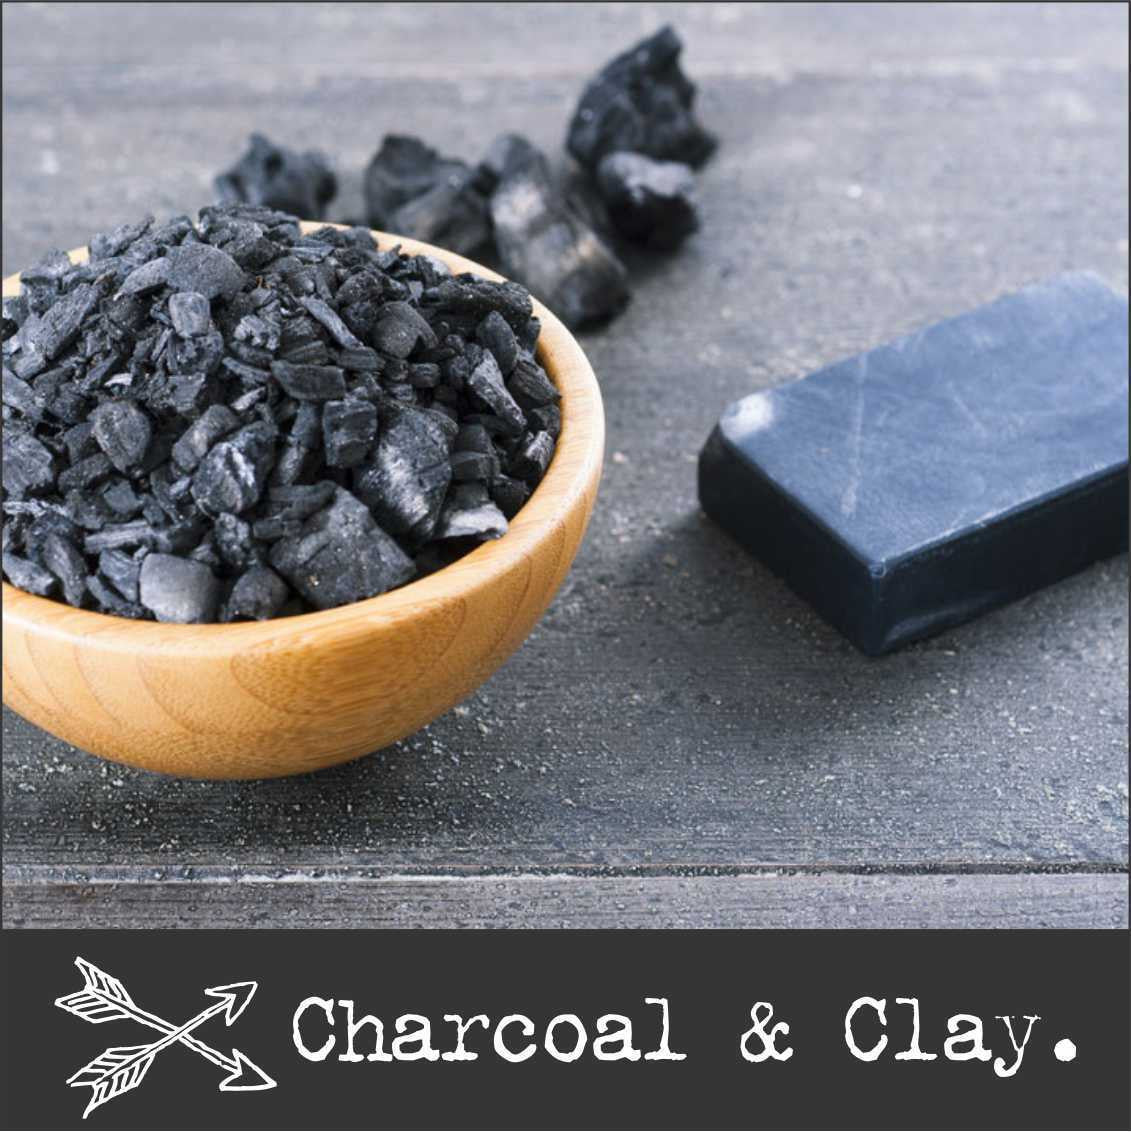 Organic Activated Carbon Charcoal For Teeth, Supplement. Powdered